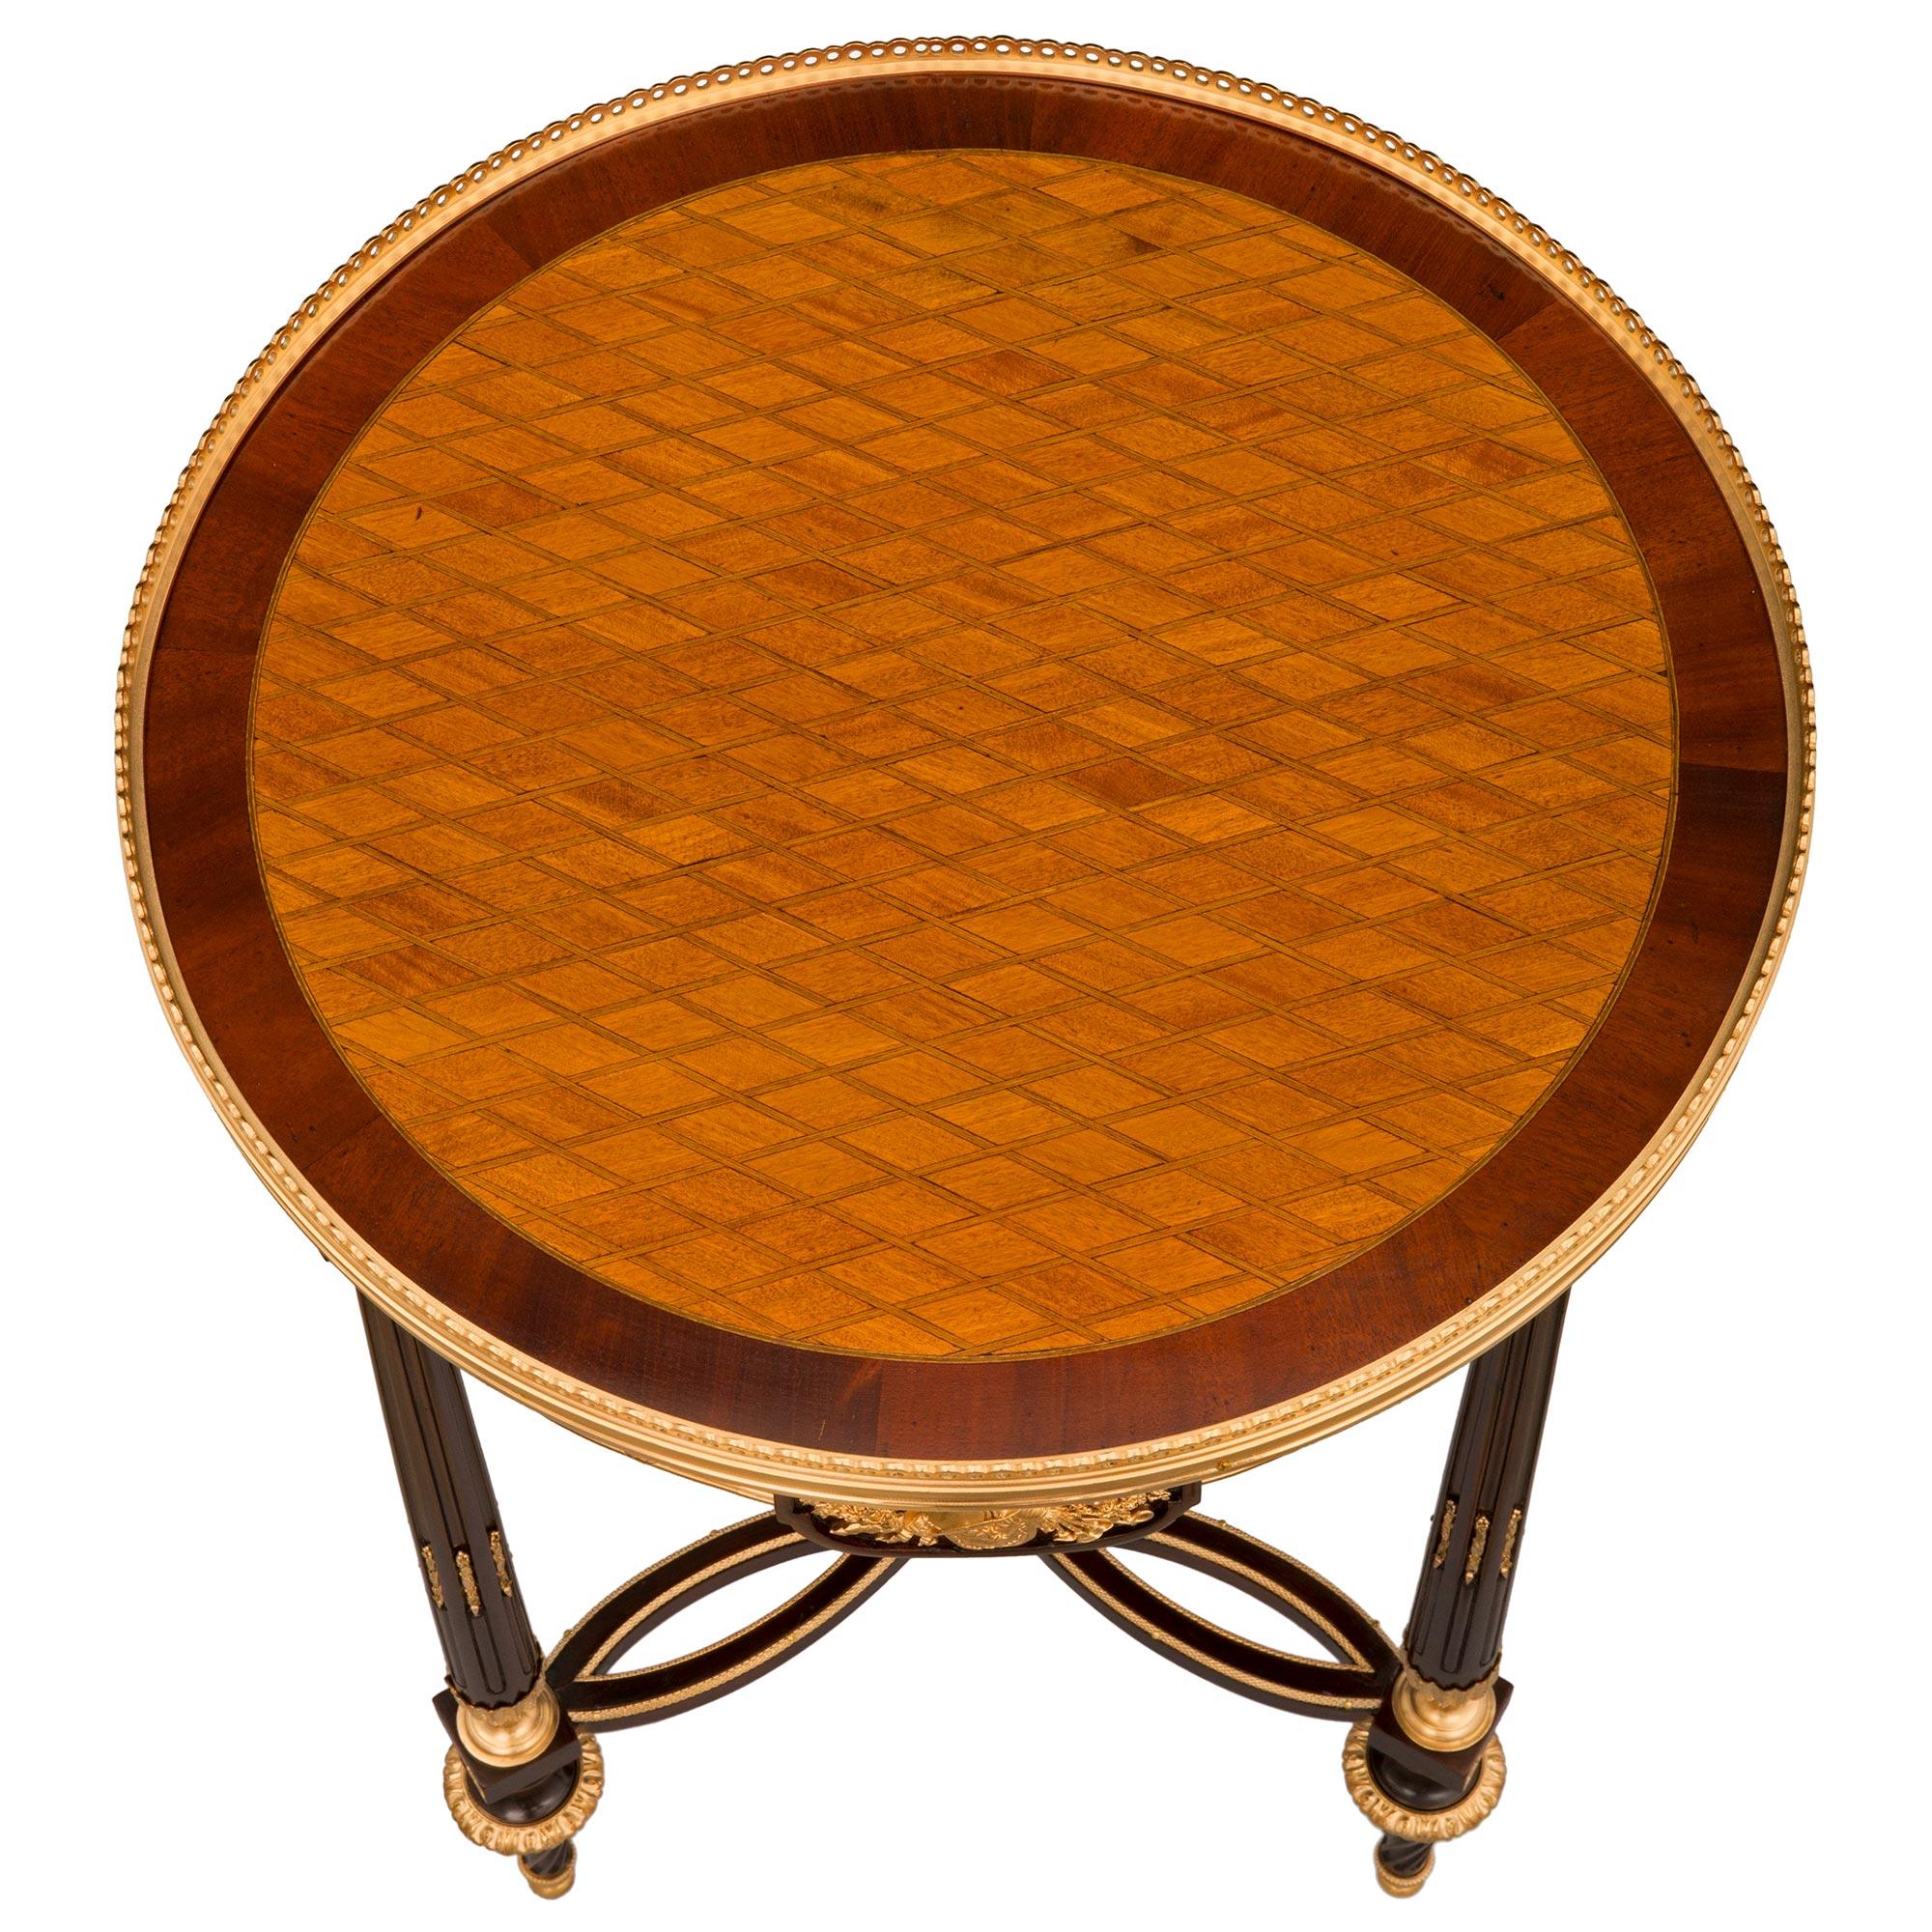 An elegant French 19th century Louis XVI st. mahogany, tulipwood, charmwood, and ormolu side table. The circular table is raised by beautiful circular tapered feet with a most decorative fluted spiral design, topie shaped ormolu sabots, and foliate